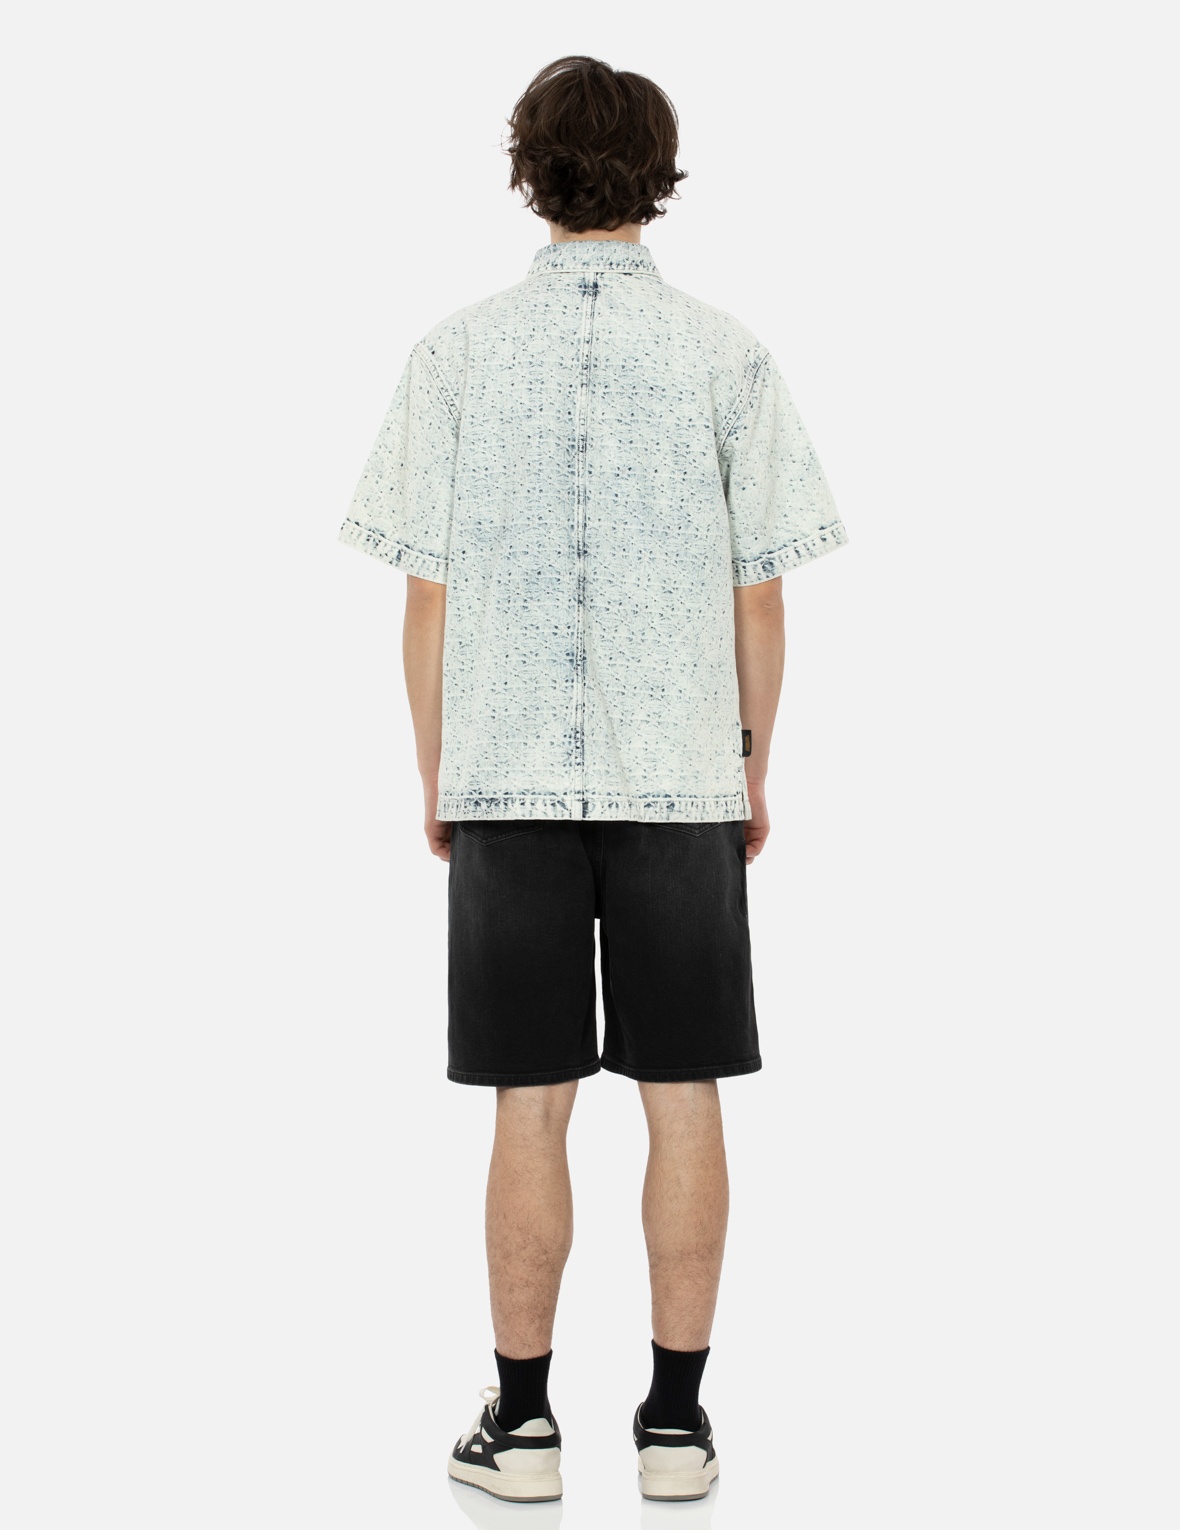 WASHED ALLOVER KAMON JACQUARD AND SEAGULL EMBROIDERY BOXY DENIM SHIRT - 6